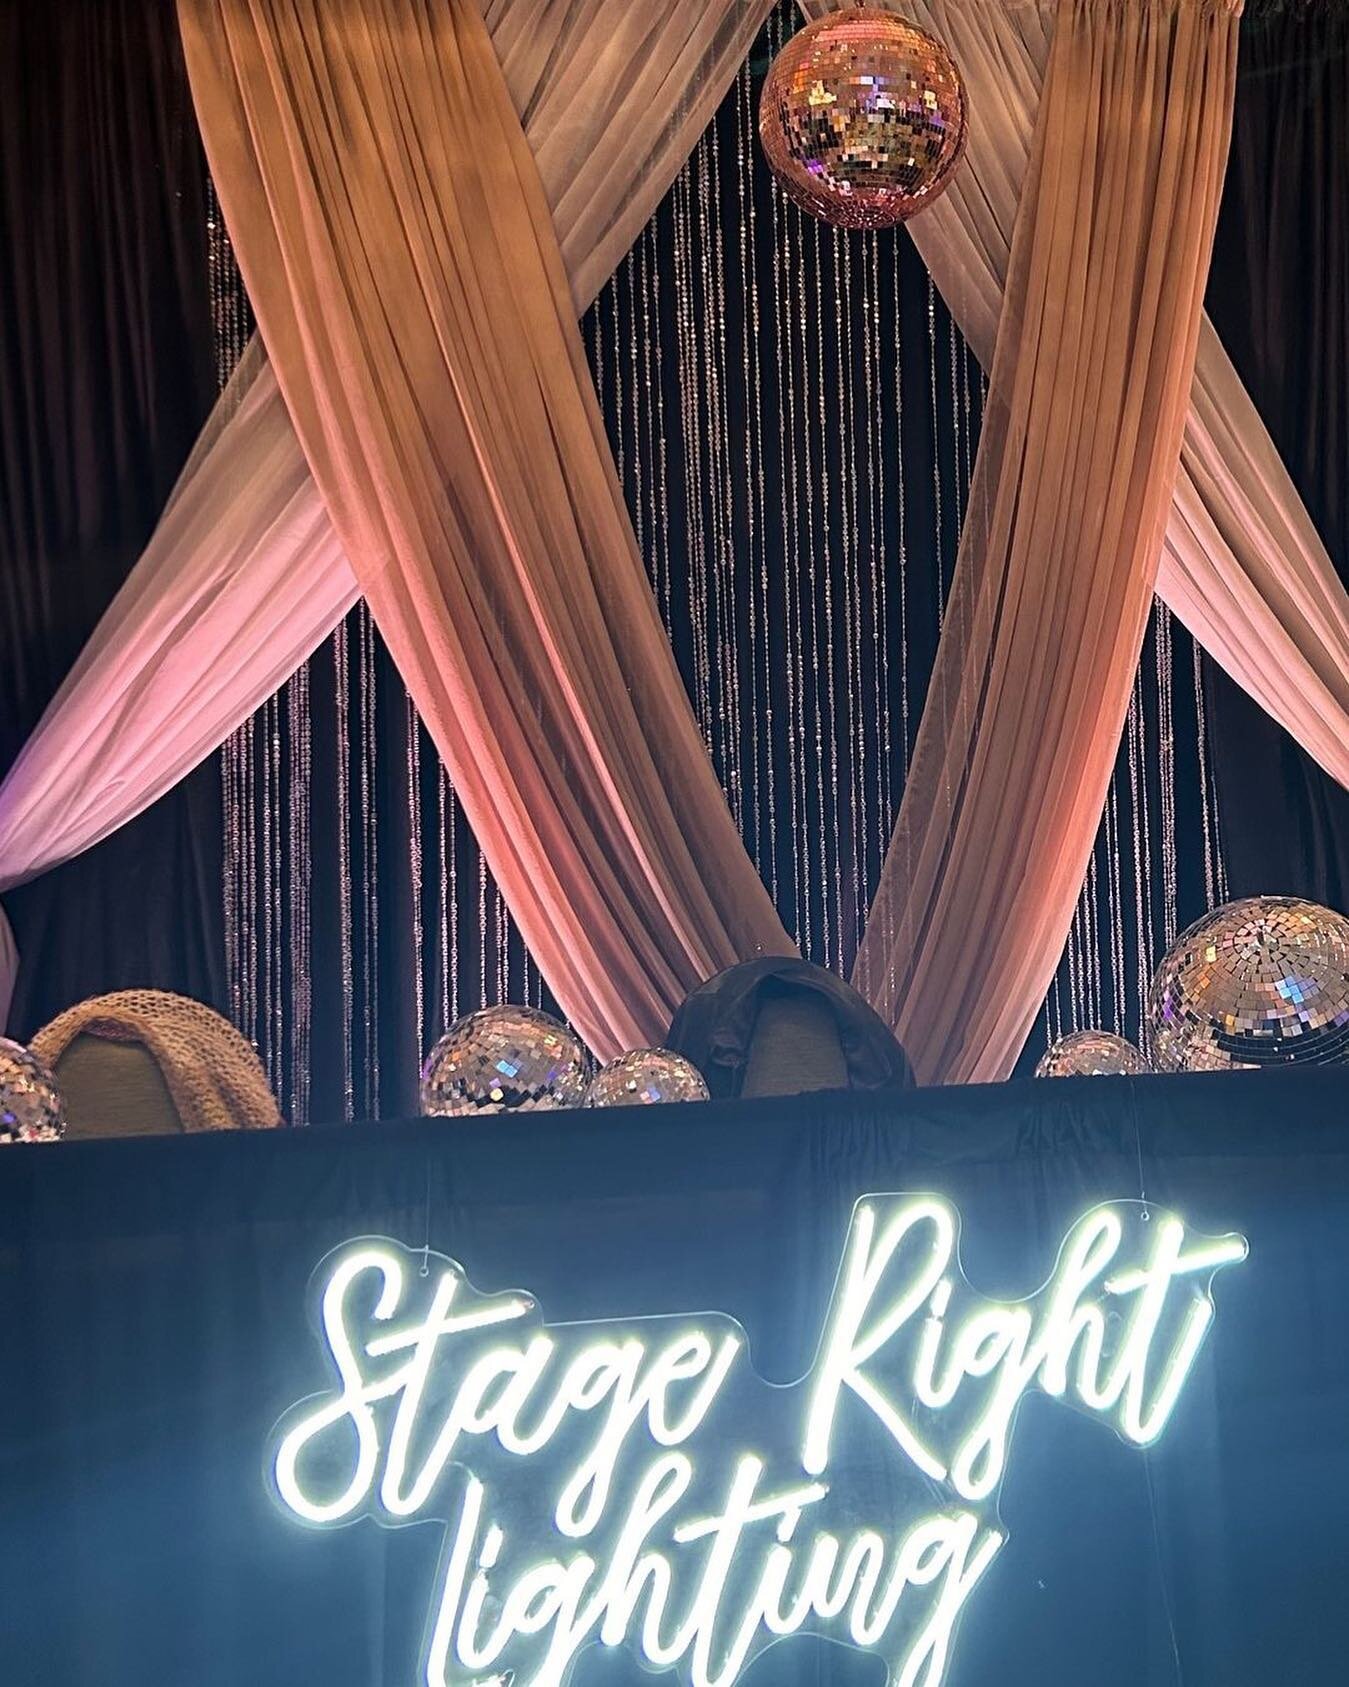 Low quality photo, high quality booth design! We gave our technicians an inspiration photo and they absolutely nailed it! 🛠

Thank you @coastalvaweddings for allowing us to be a part of your amazing show!! See you next year! ✨